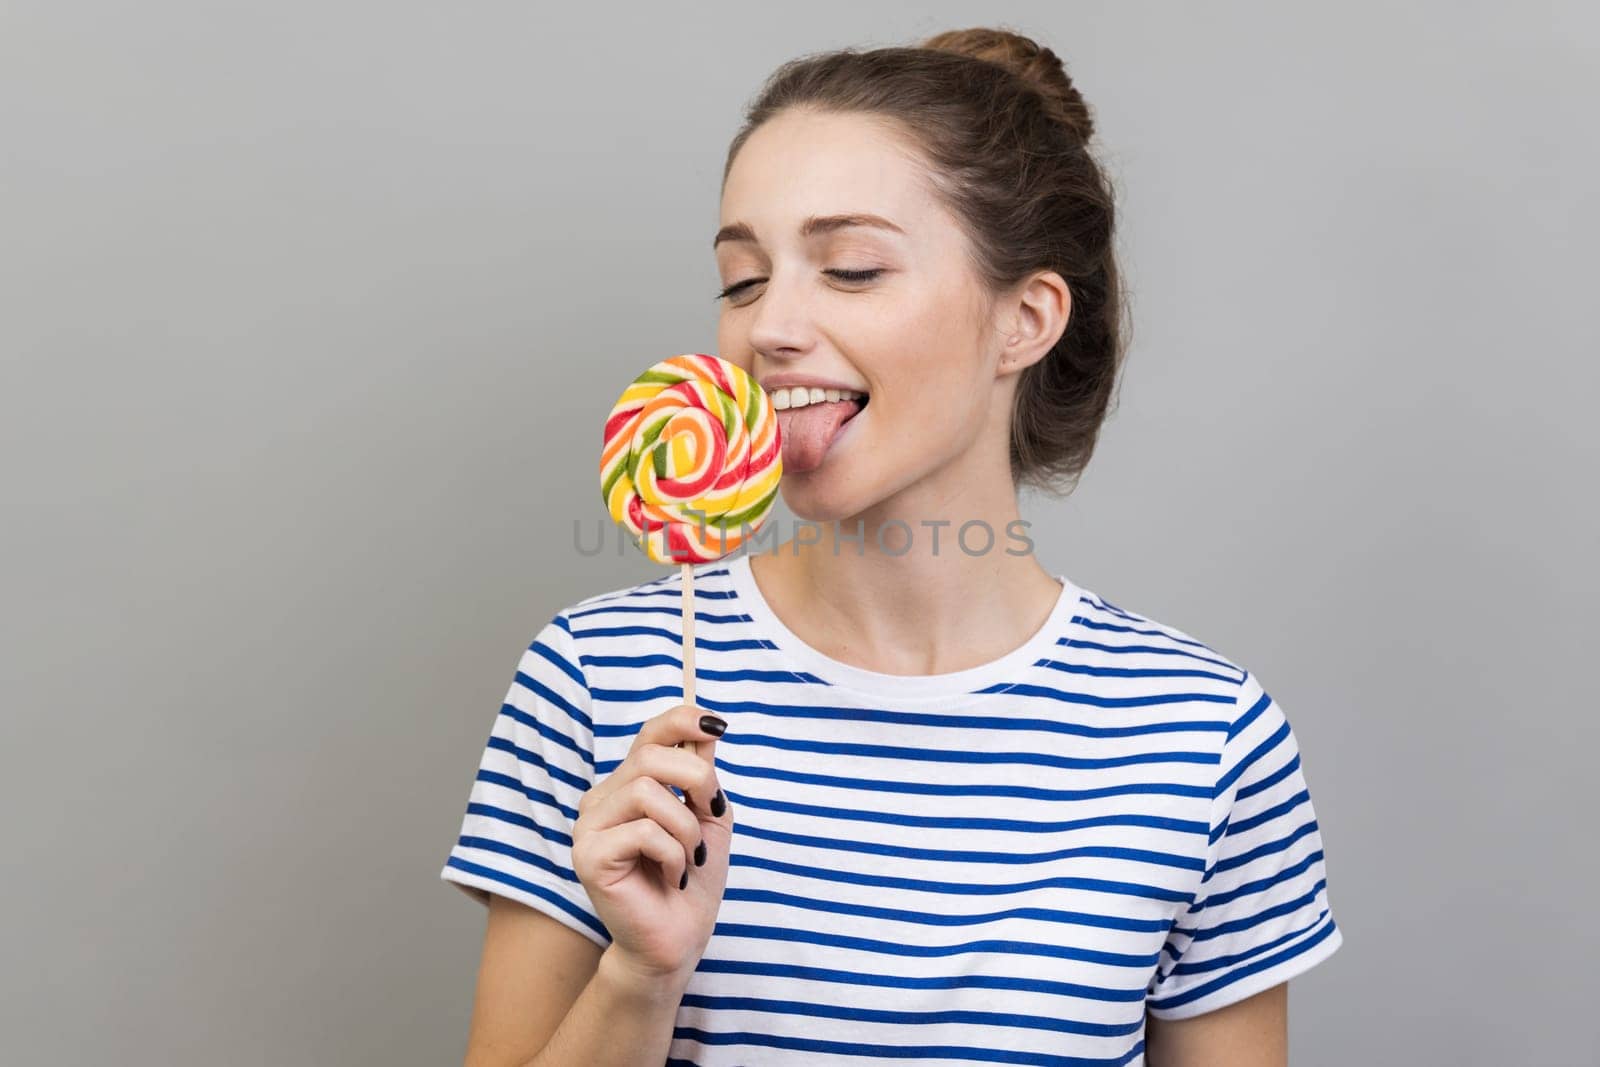 Portrait of happy woman wearing striped T-shirt standing with tongue out, dreaming and tempted to taste lollipop, round sweet sugary rainbow candy. Indoor studio shot isolated on gray background.